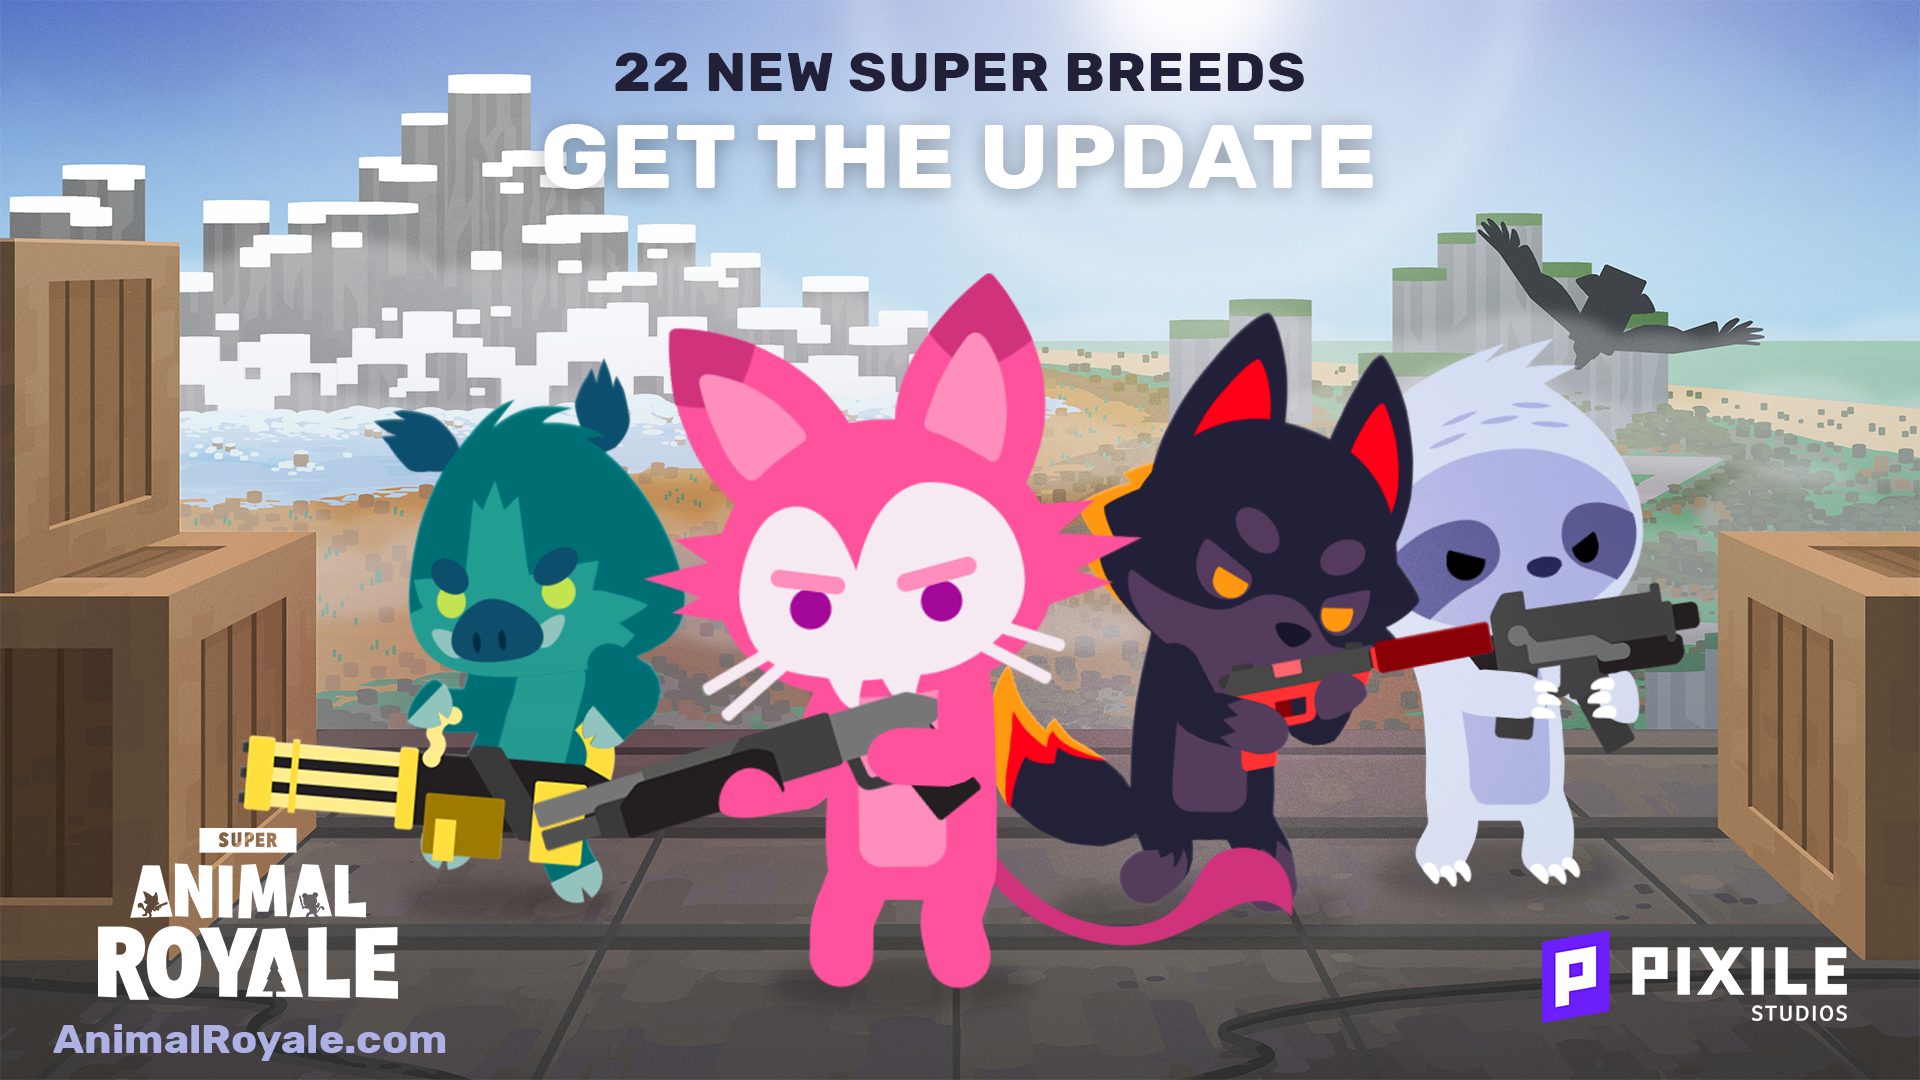 Steam :: Super Animal Royale :: Squid up with the official launch of Squads  (+ new breeds, revamped mountains and more)!